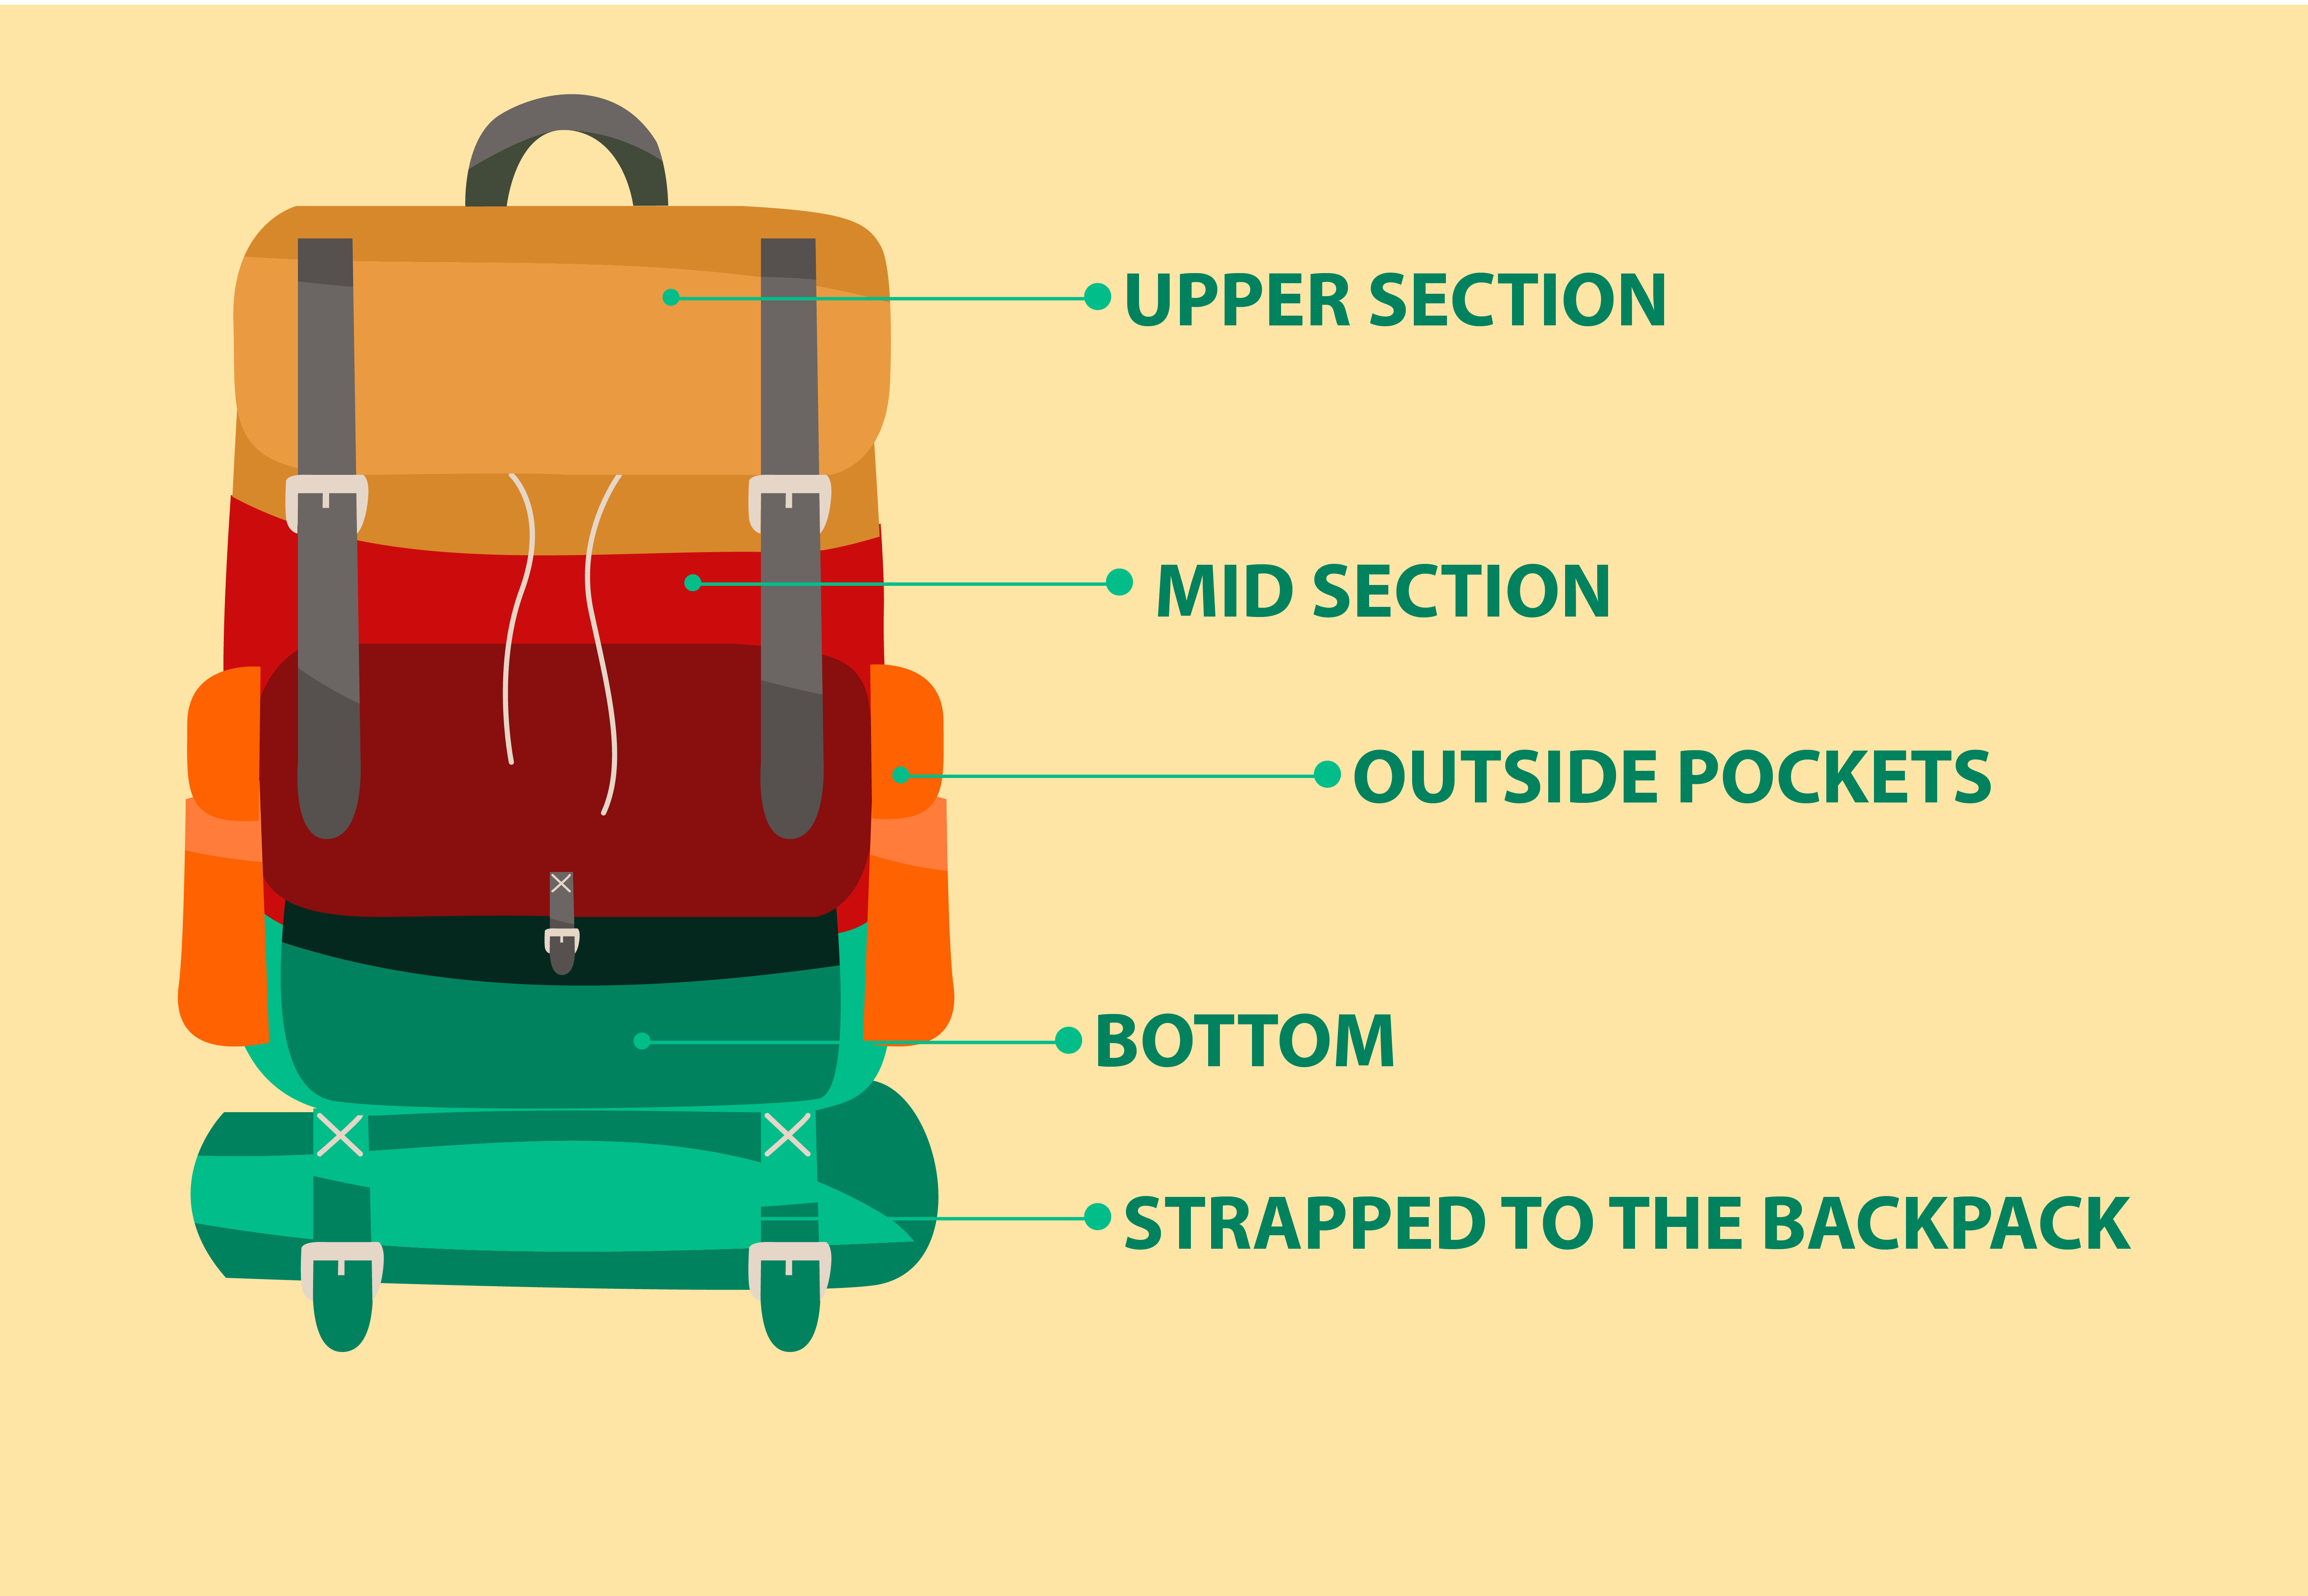 sections of a backpack - bottom, mid, upper and outside pockets